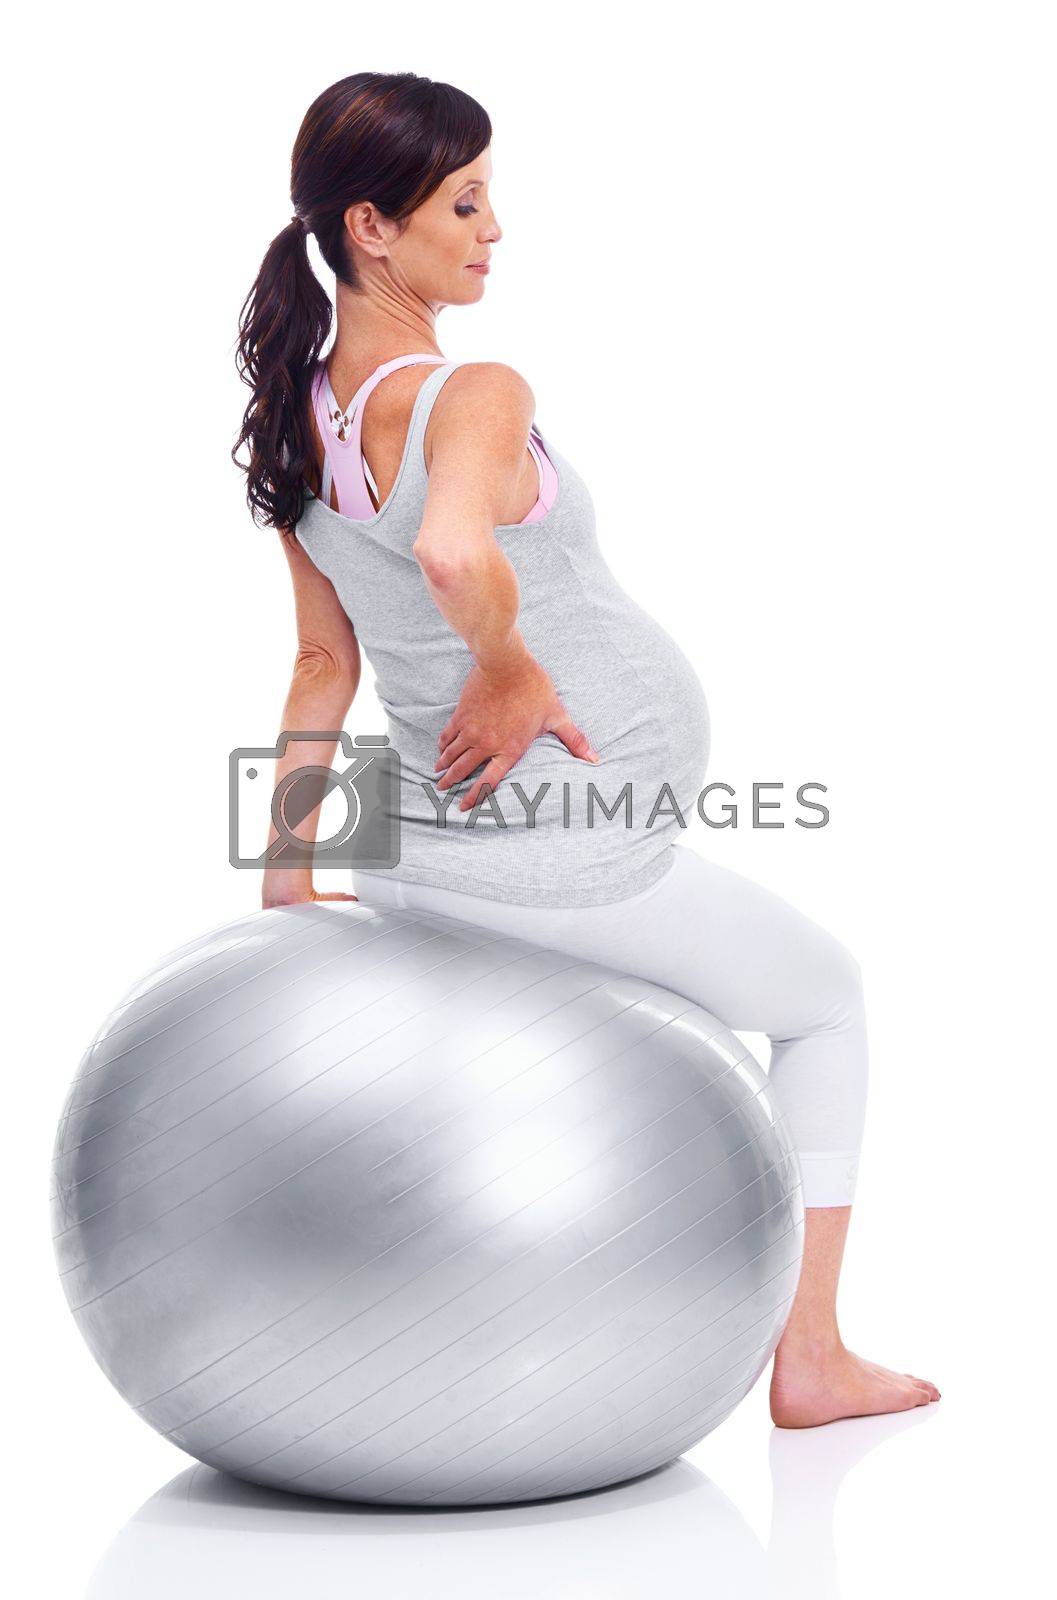 Royalty free image of Making sure her back is supported. A pregnant mother sitting on a pilates ball. by YuriArcurs